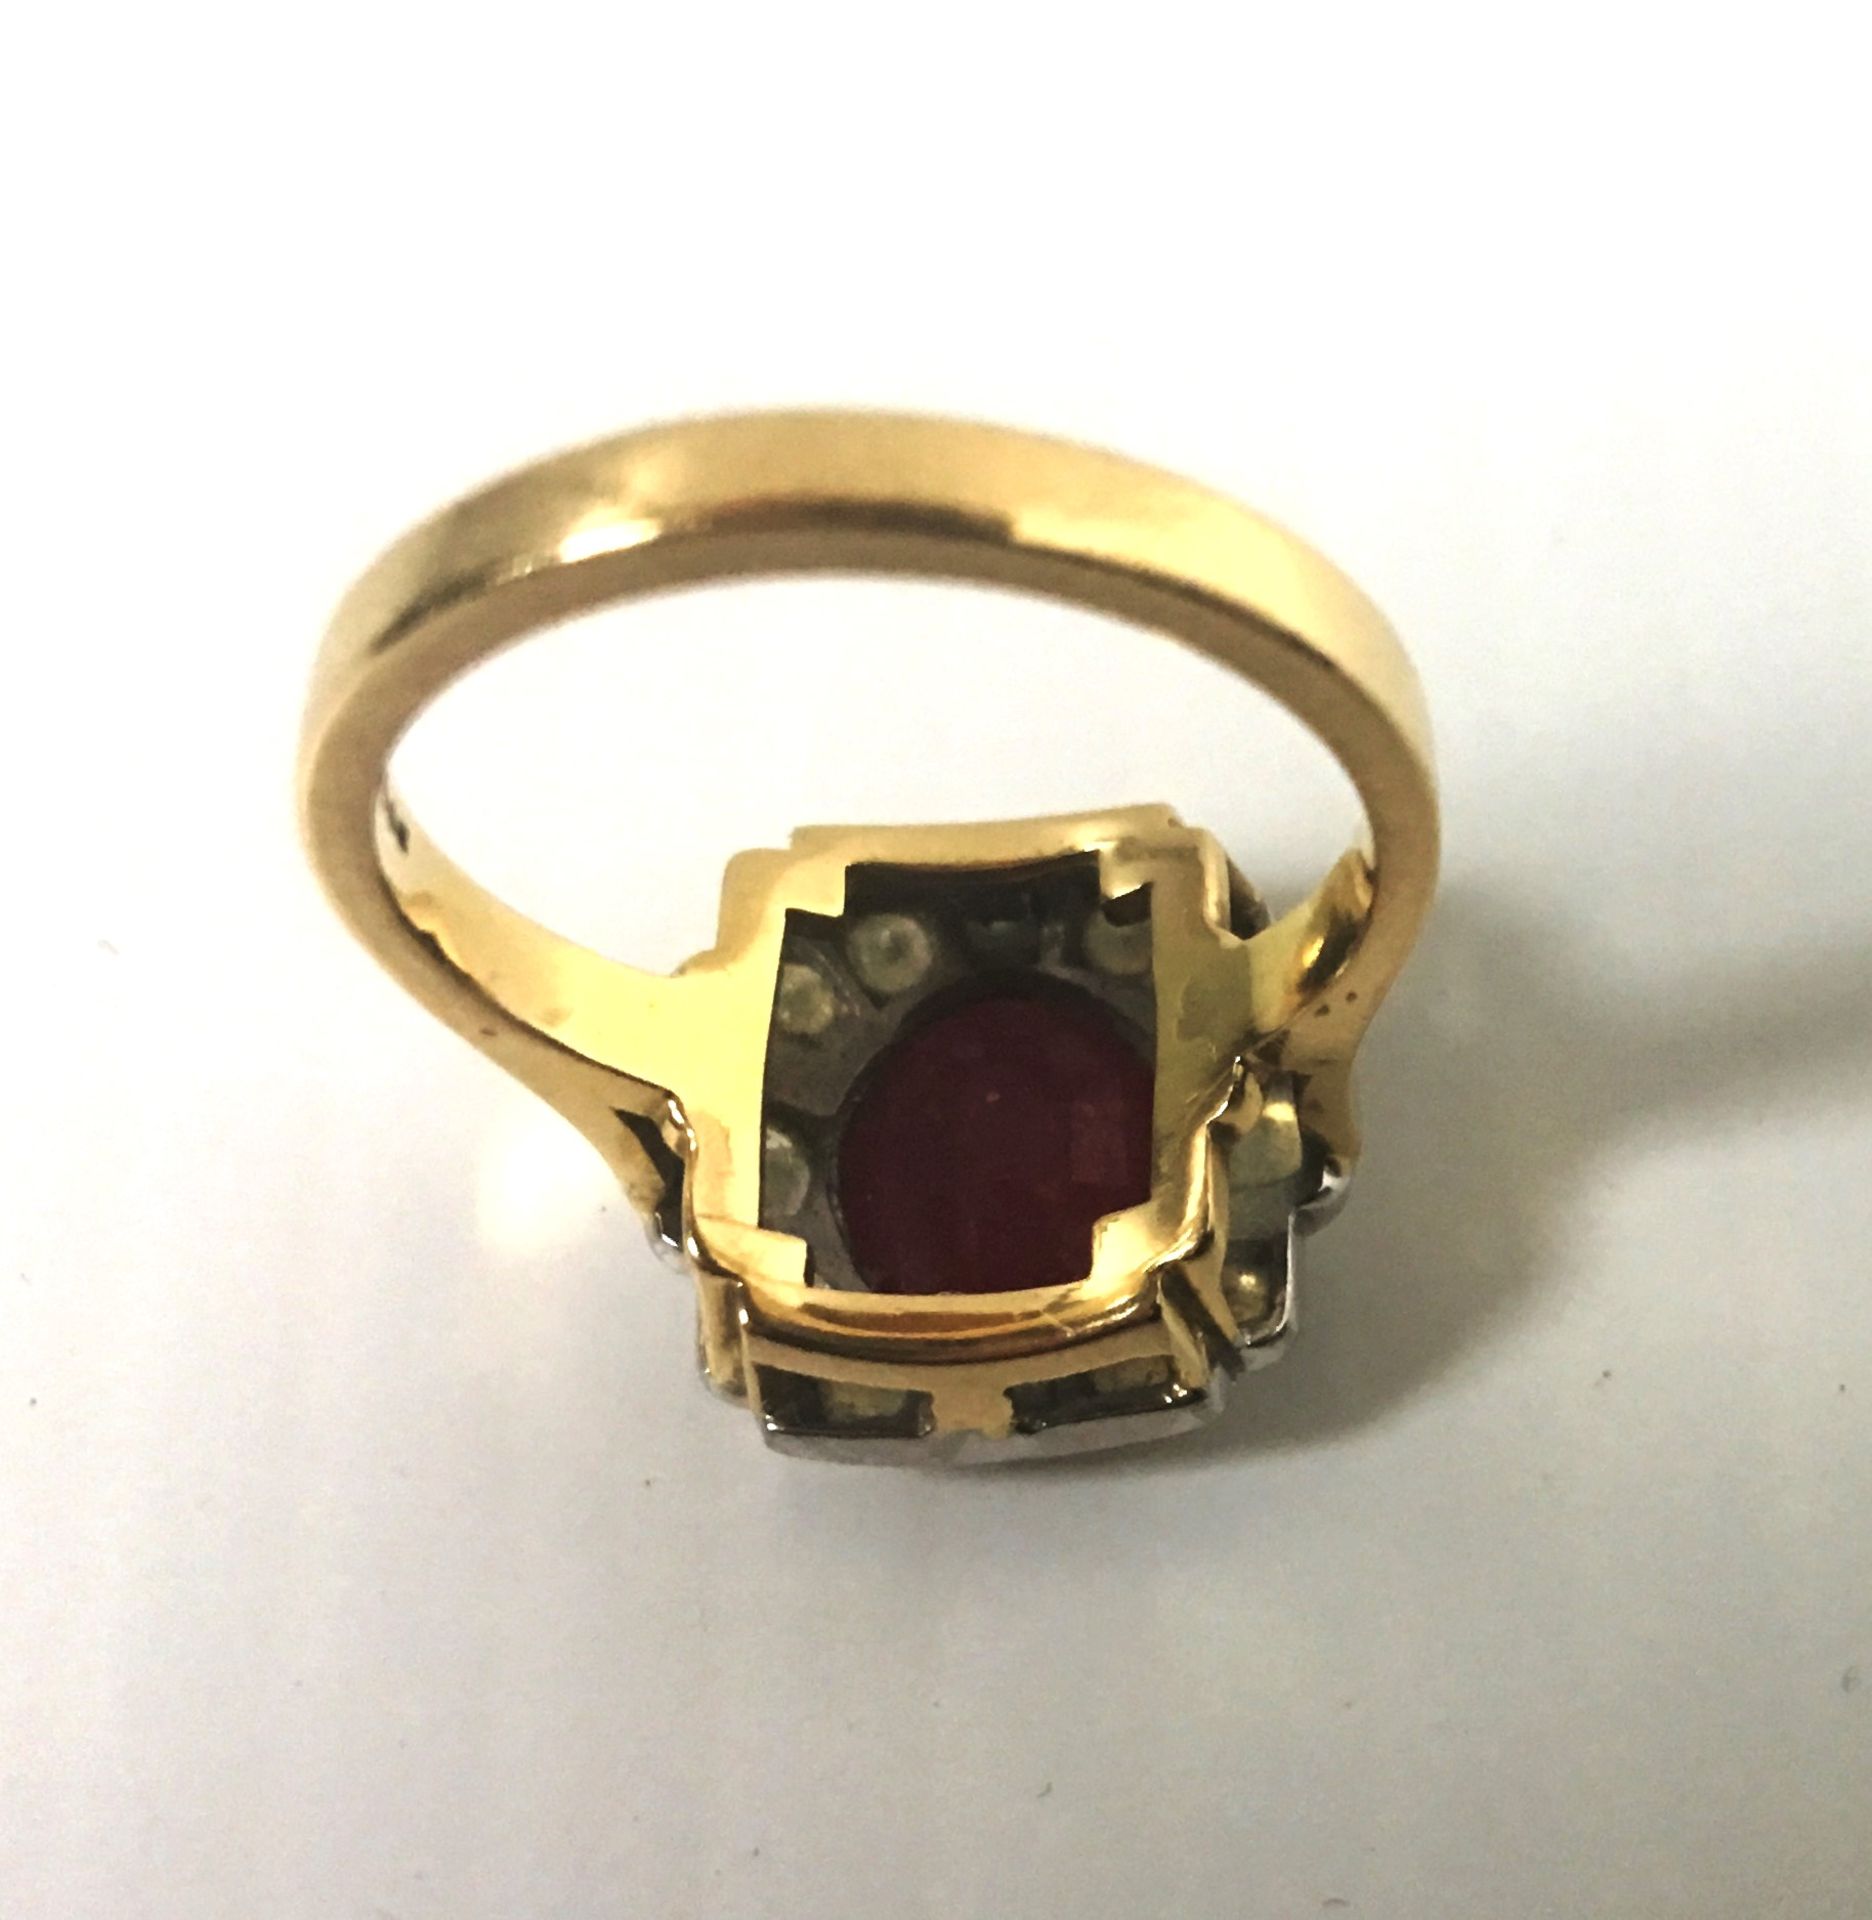 An Art Deco style ruby and diamond ring complete with valuation certificate which details the ring - Image 7 of 8